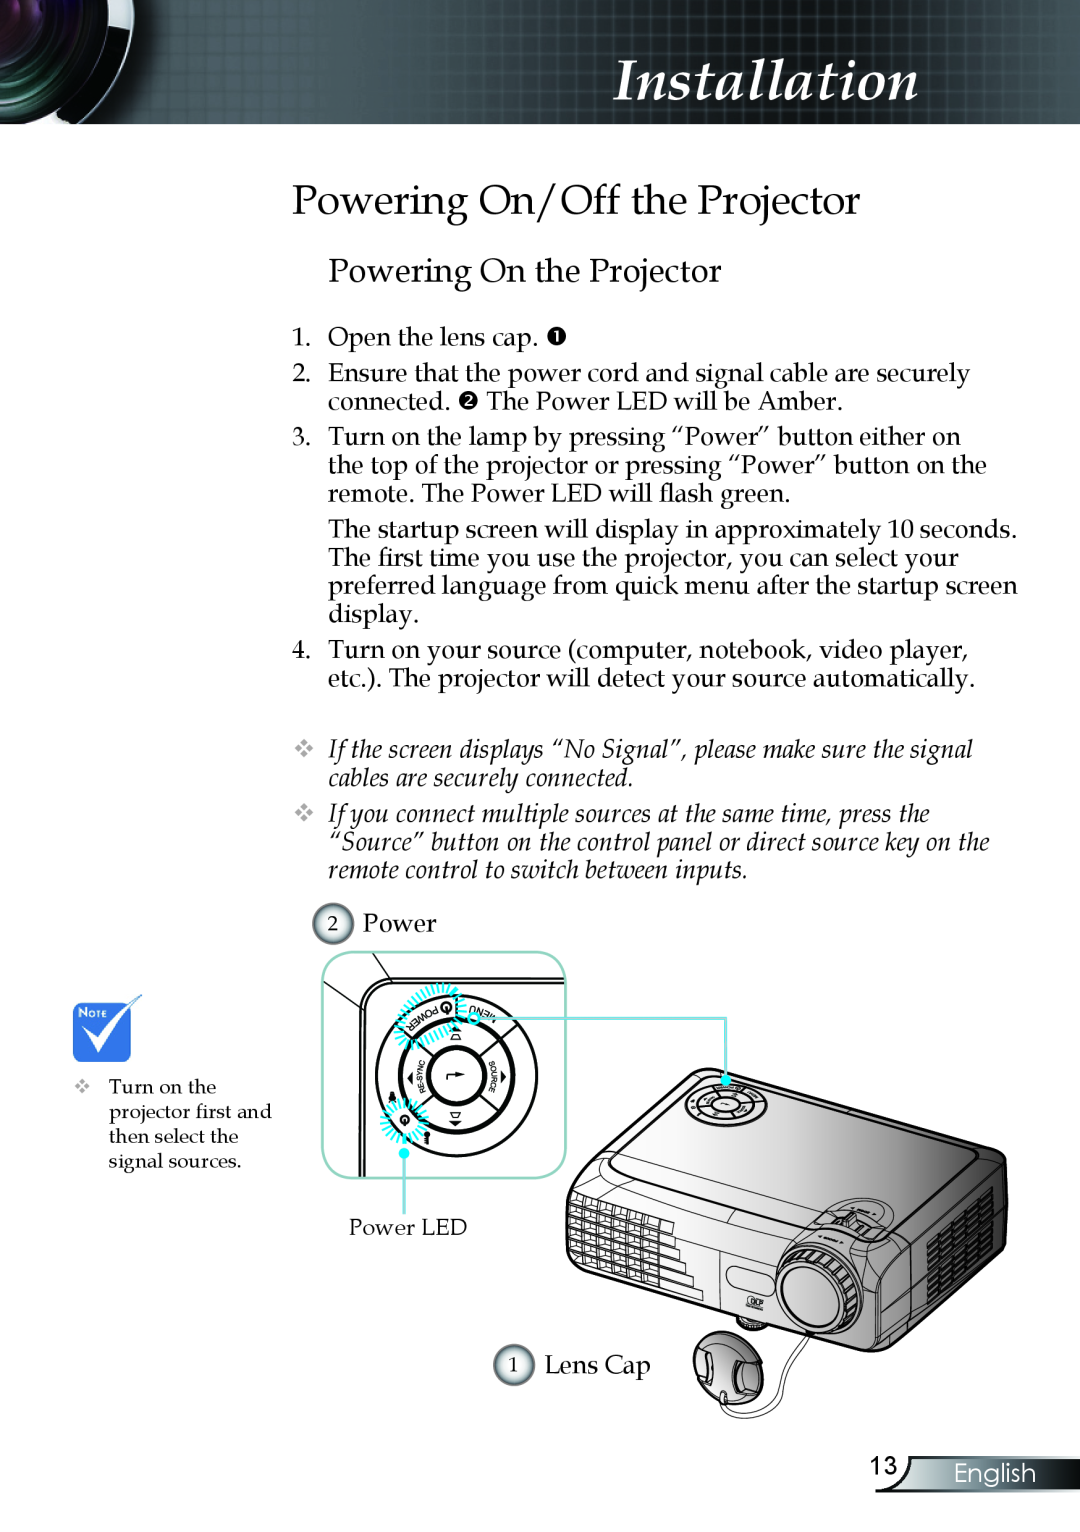 Optoma Technology TX330 manual Powering On/Off the Projector, Powering On the Projector, English, Installation 